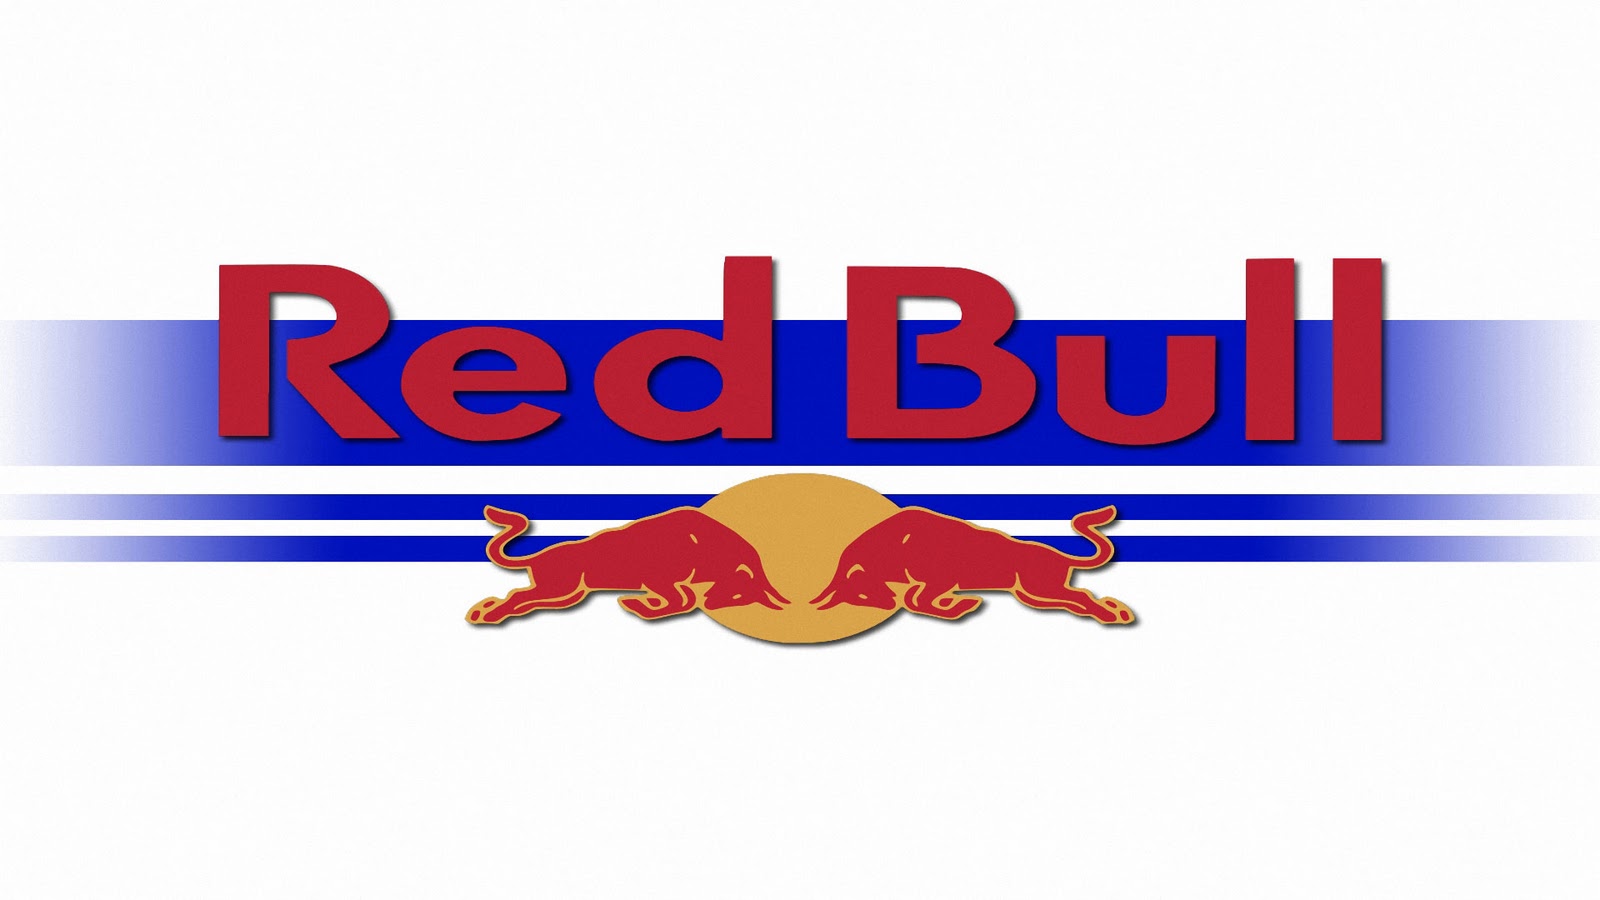 Everything About All Logos Red Bull Logo Picture Gallery